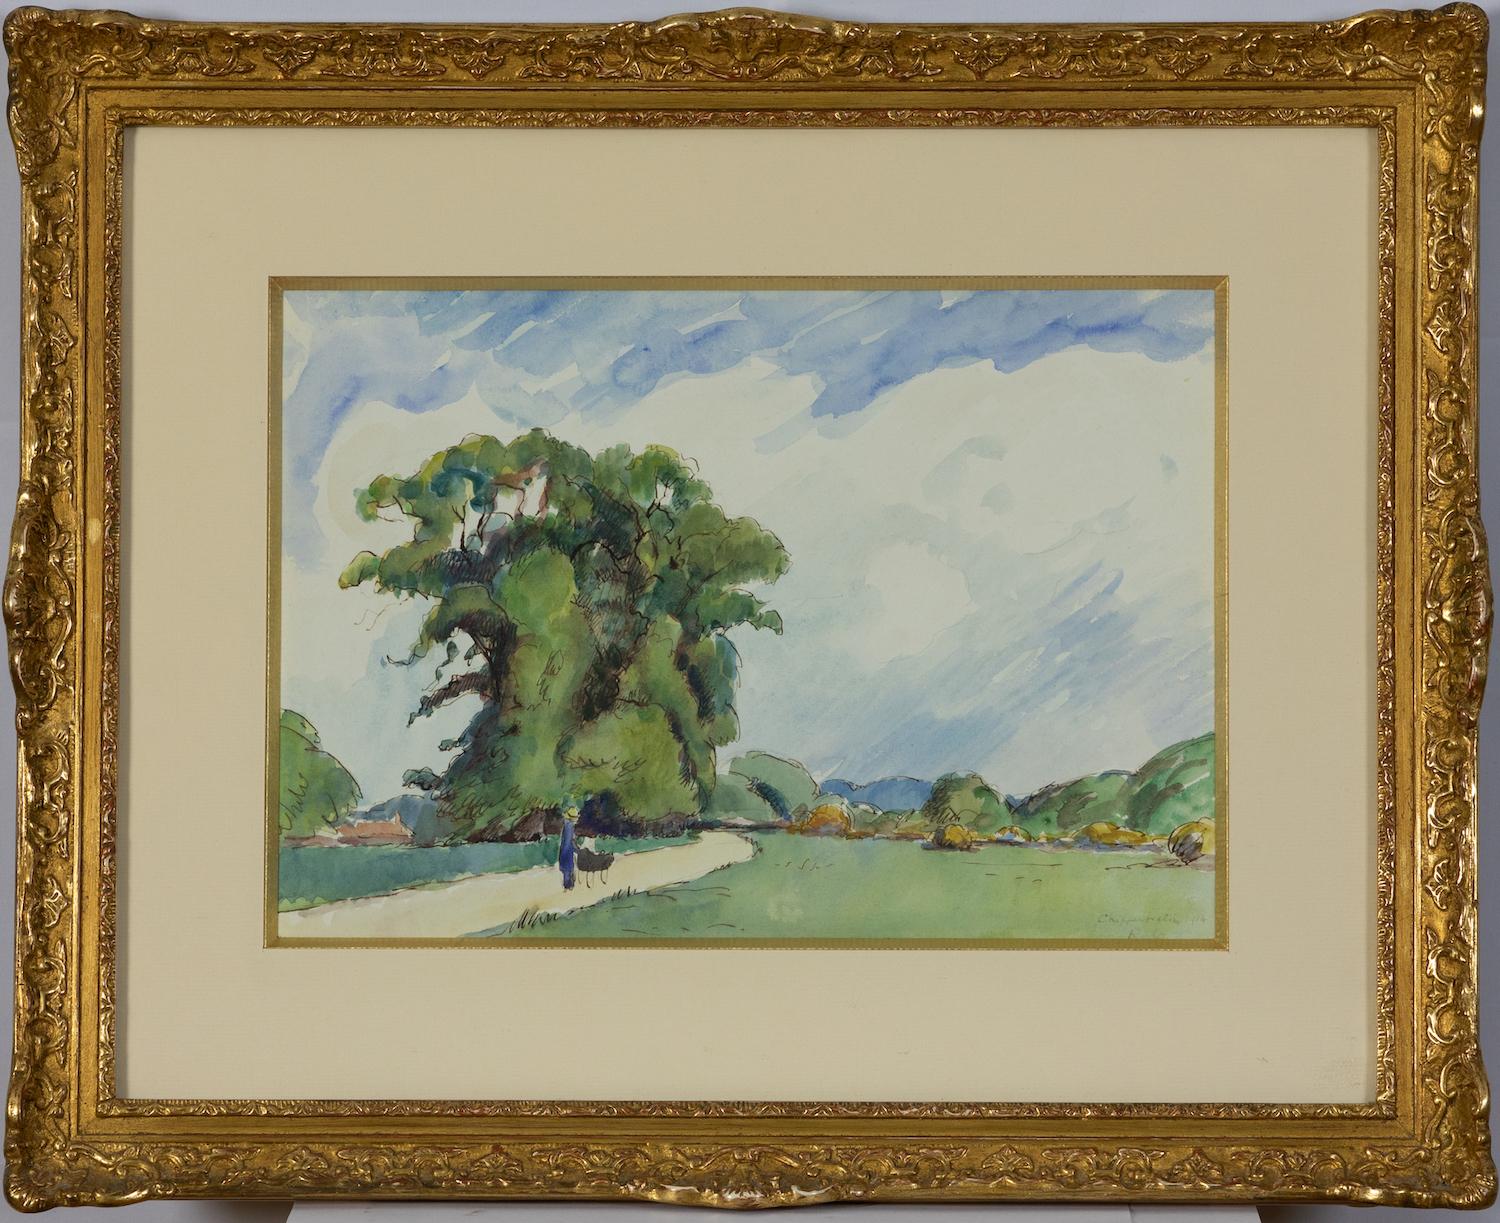 *UK BUYERS WILL PAY AN ADDITIONAL 20% VAT ON TOP OF THE ABOVE PRICE

Paysage à Chippenfield by Ludovic-Rodo Pissarro (1878-1952)
Watercolour and ink on paper
23 x 33 cm (9 x 13 inches)
Signed, titled and dated lower right
Executed in